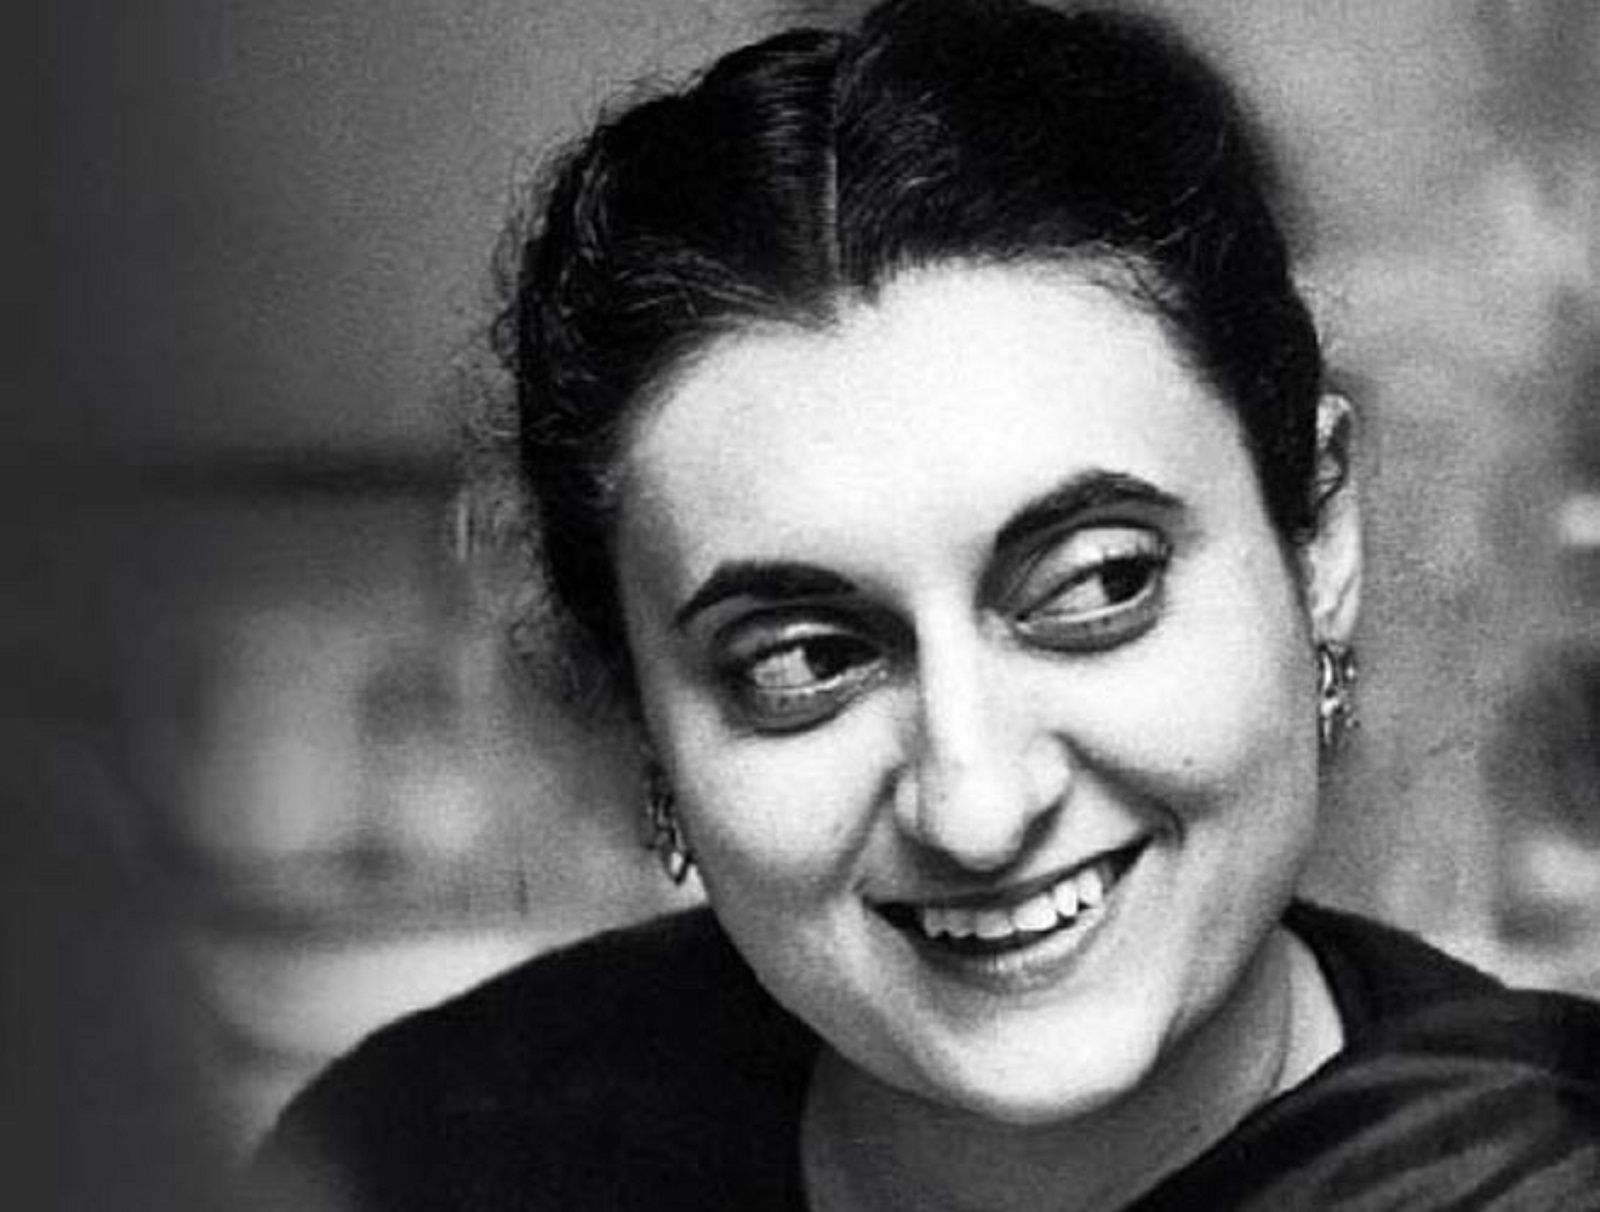 On Indira Gandhi birthday, here are some of the rare picture